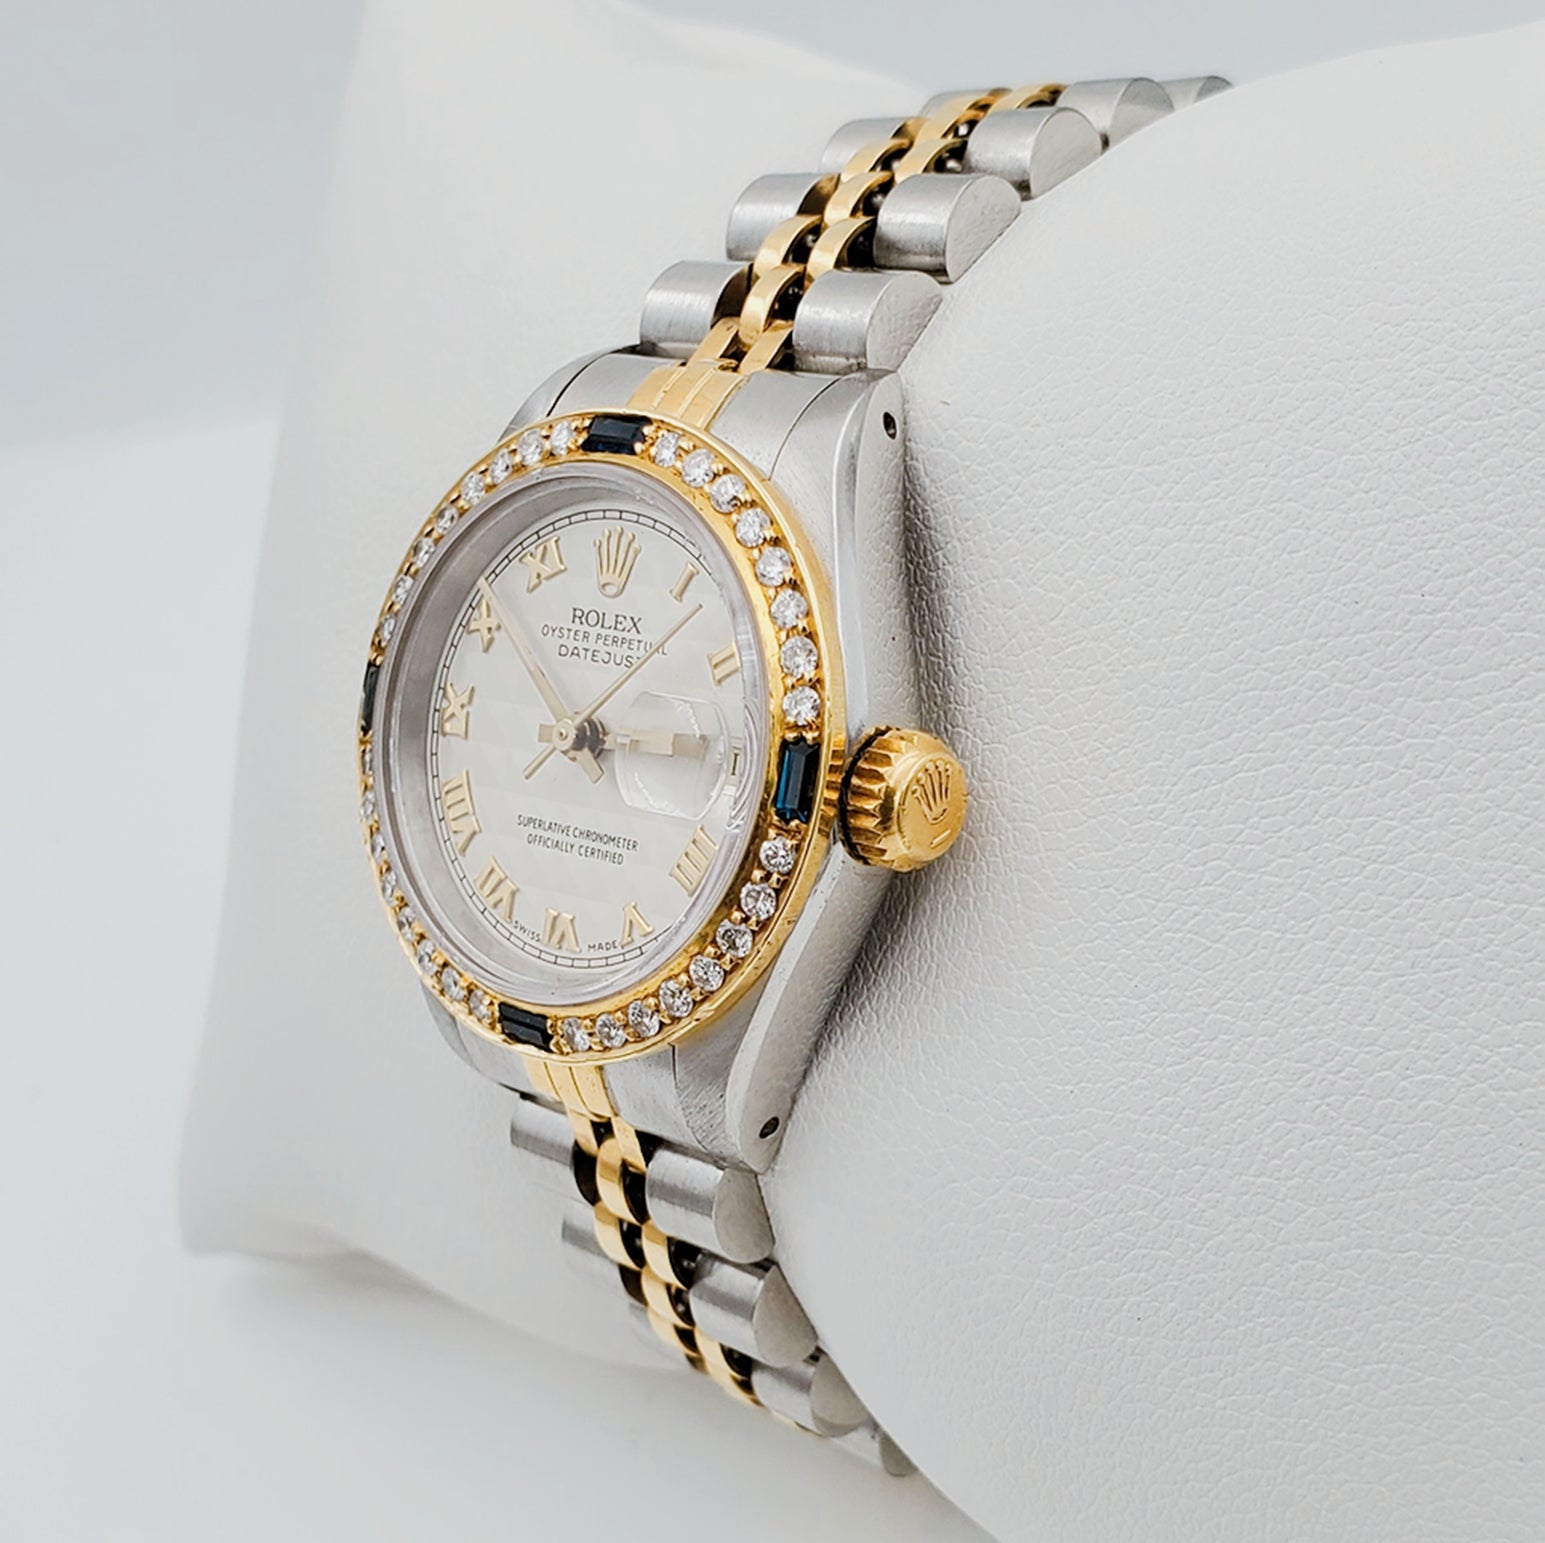 Women's Rolex 18K Gold Two-Tone 26mm DateJust Watch with Roman Numerals, Off-White Dial and Sapphire Diamond Bezel. (Pre-Owned)